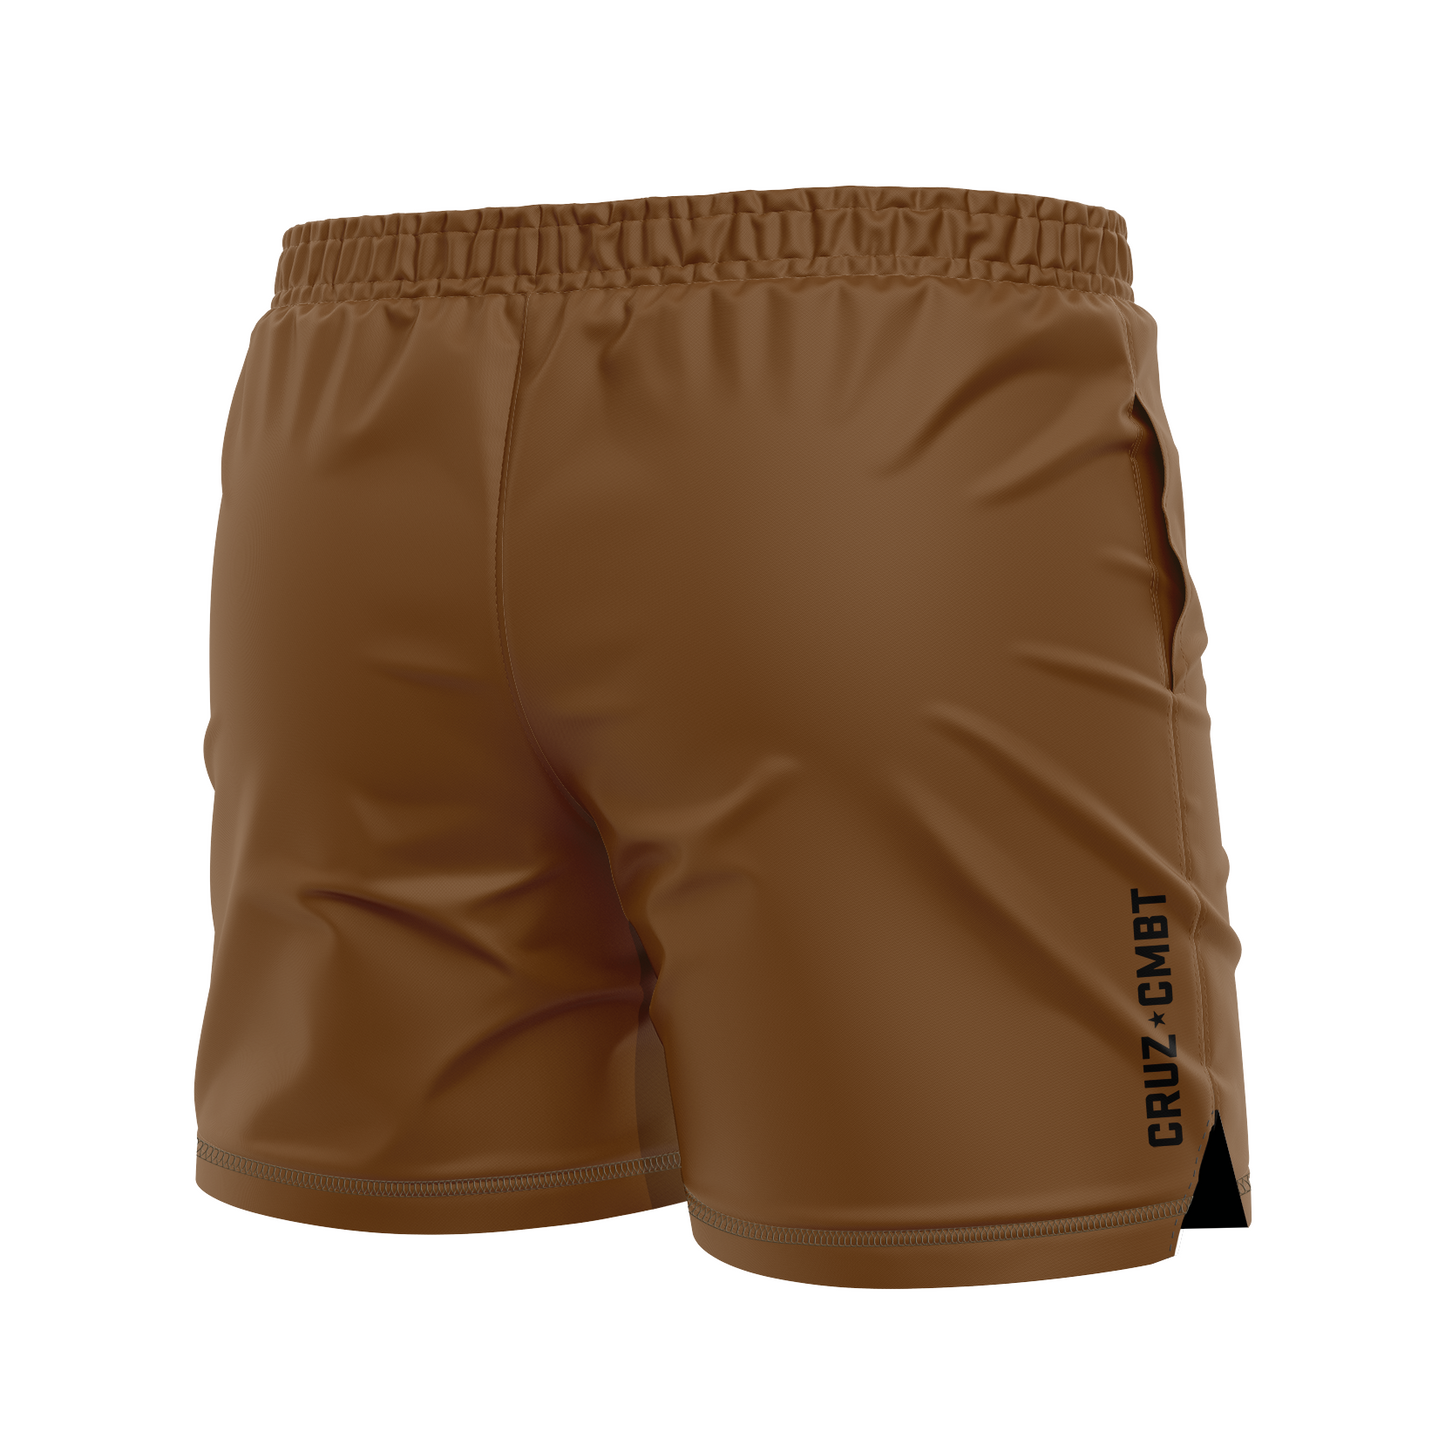 Base Collection men's FC shorts, brown and black